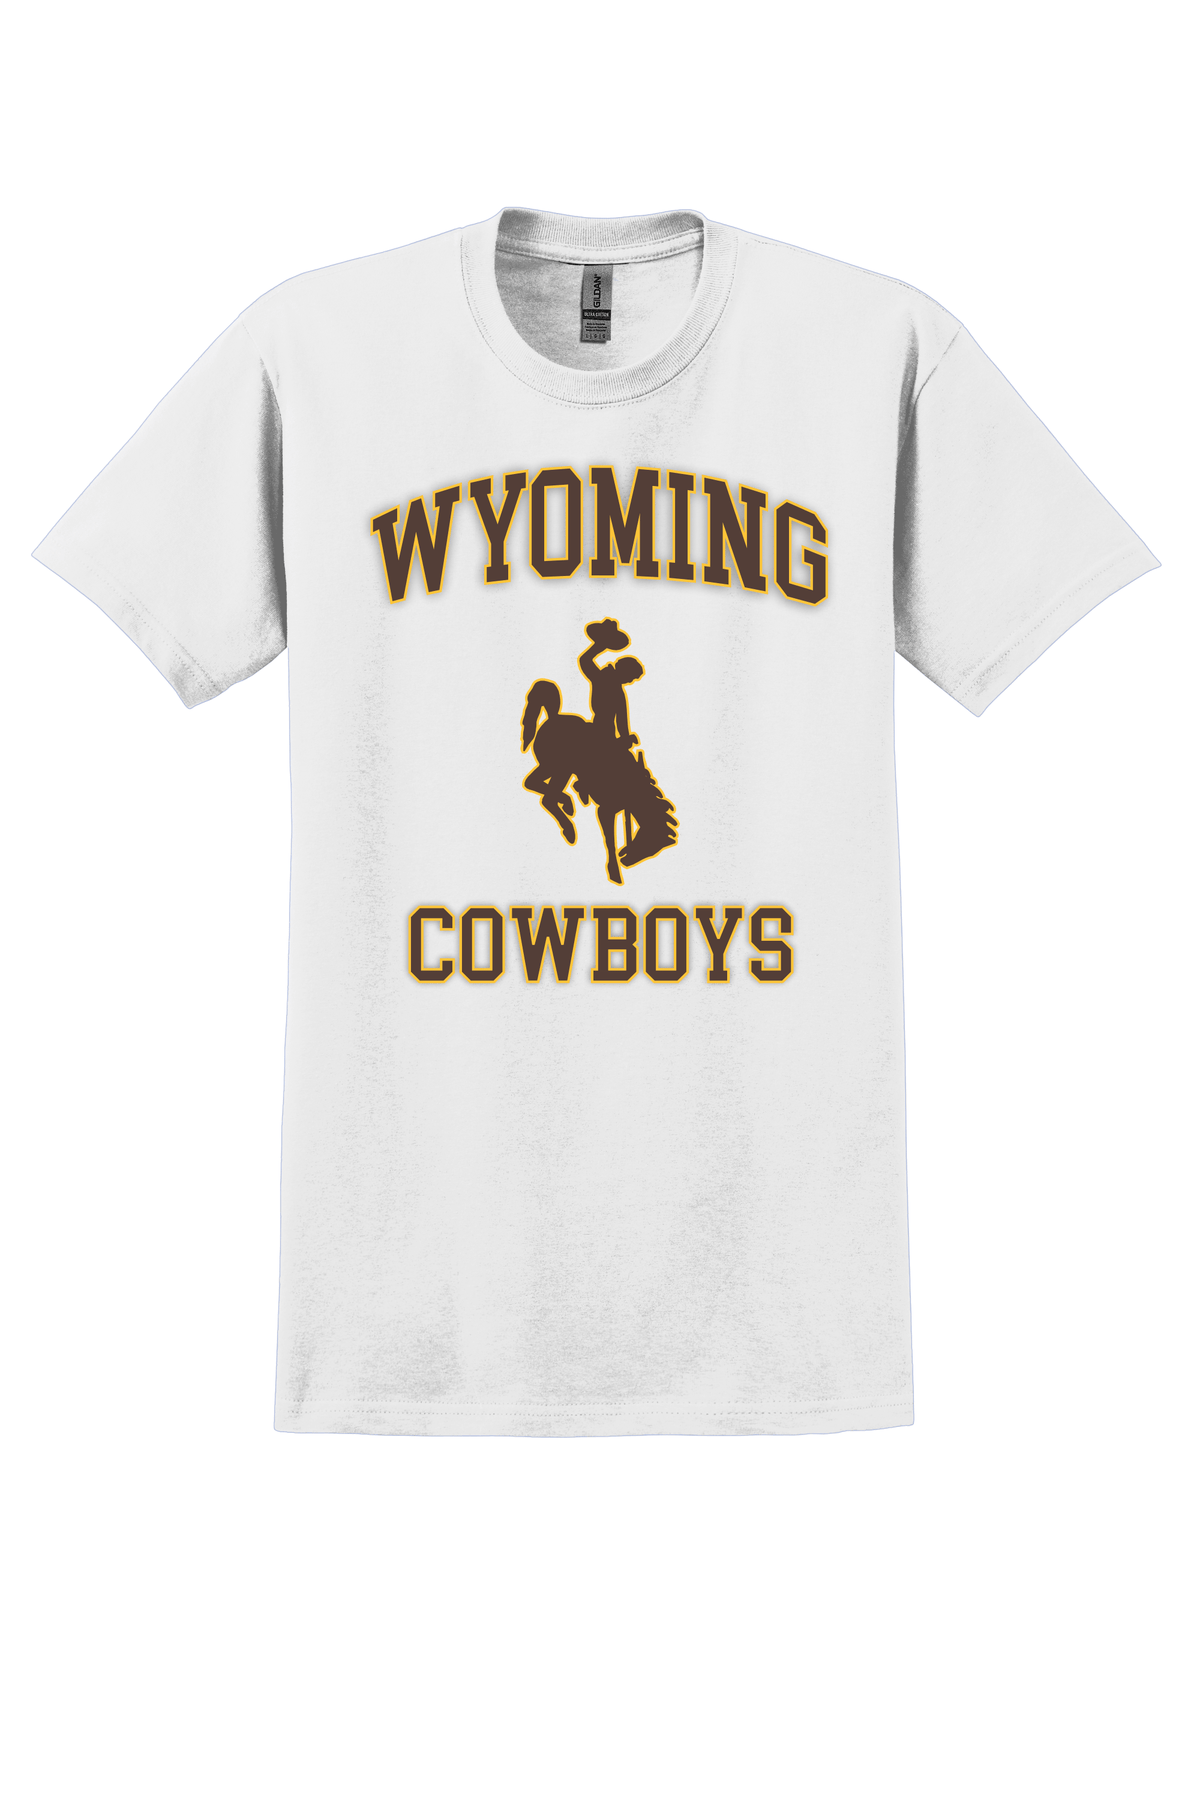 This Country Needs More Cowboys T-Shirt – Trendznmore